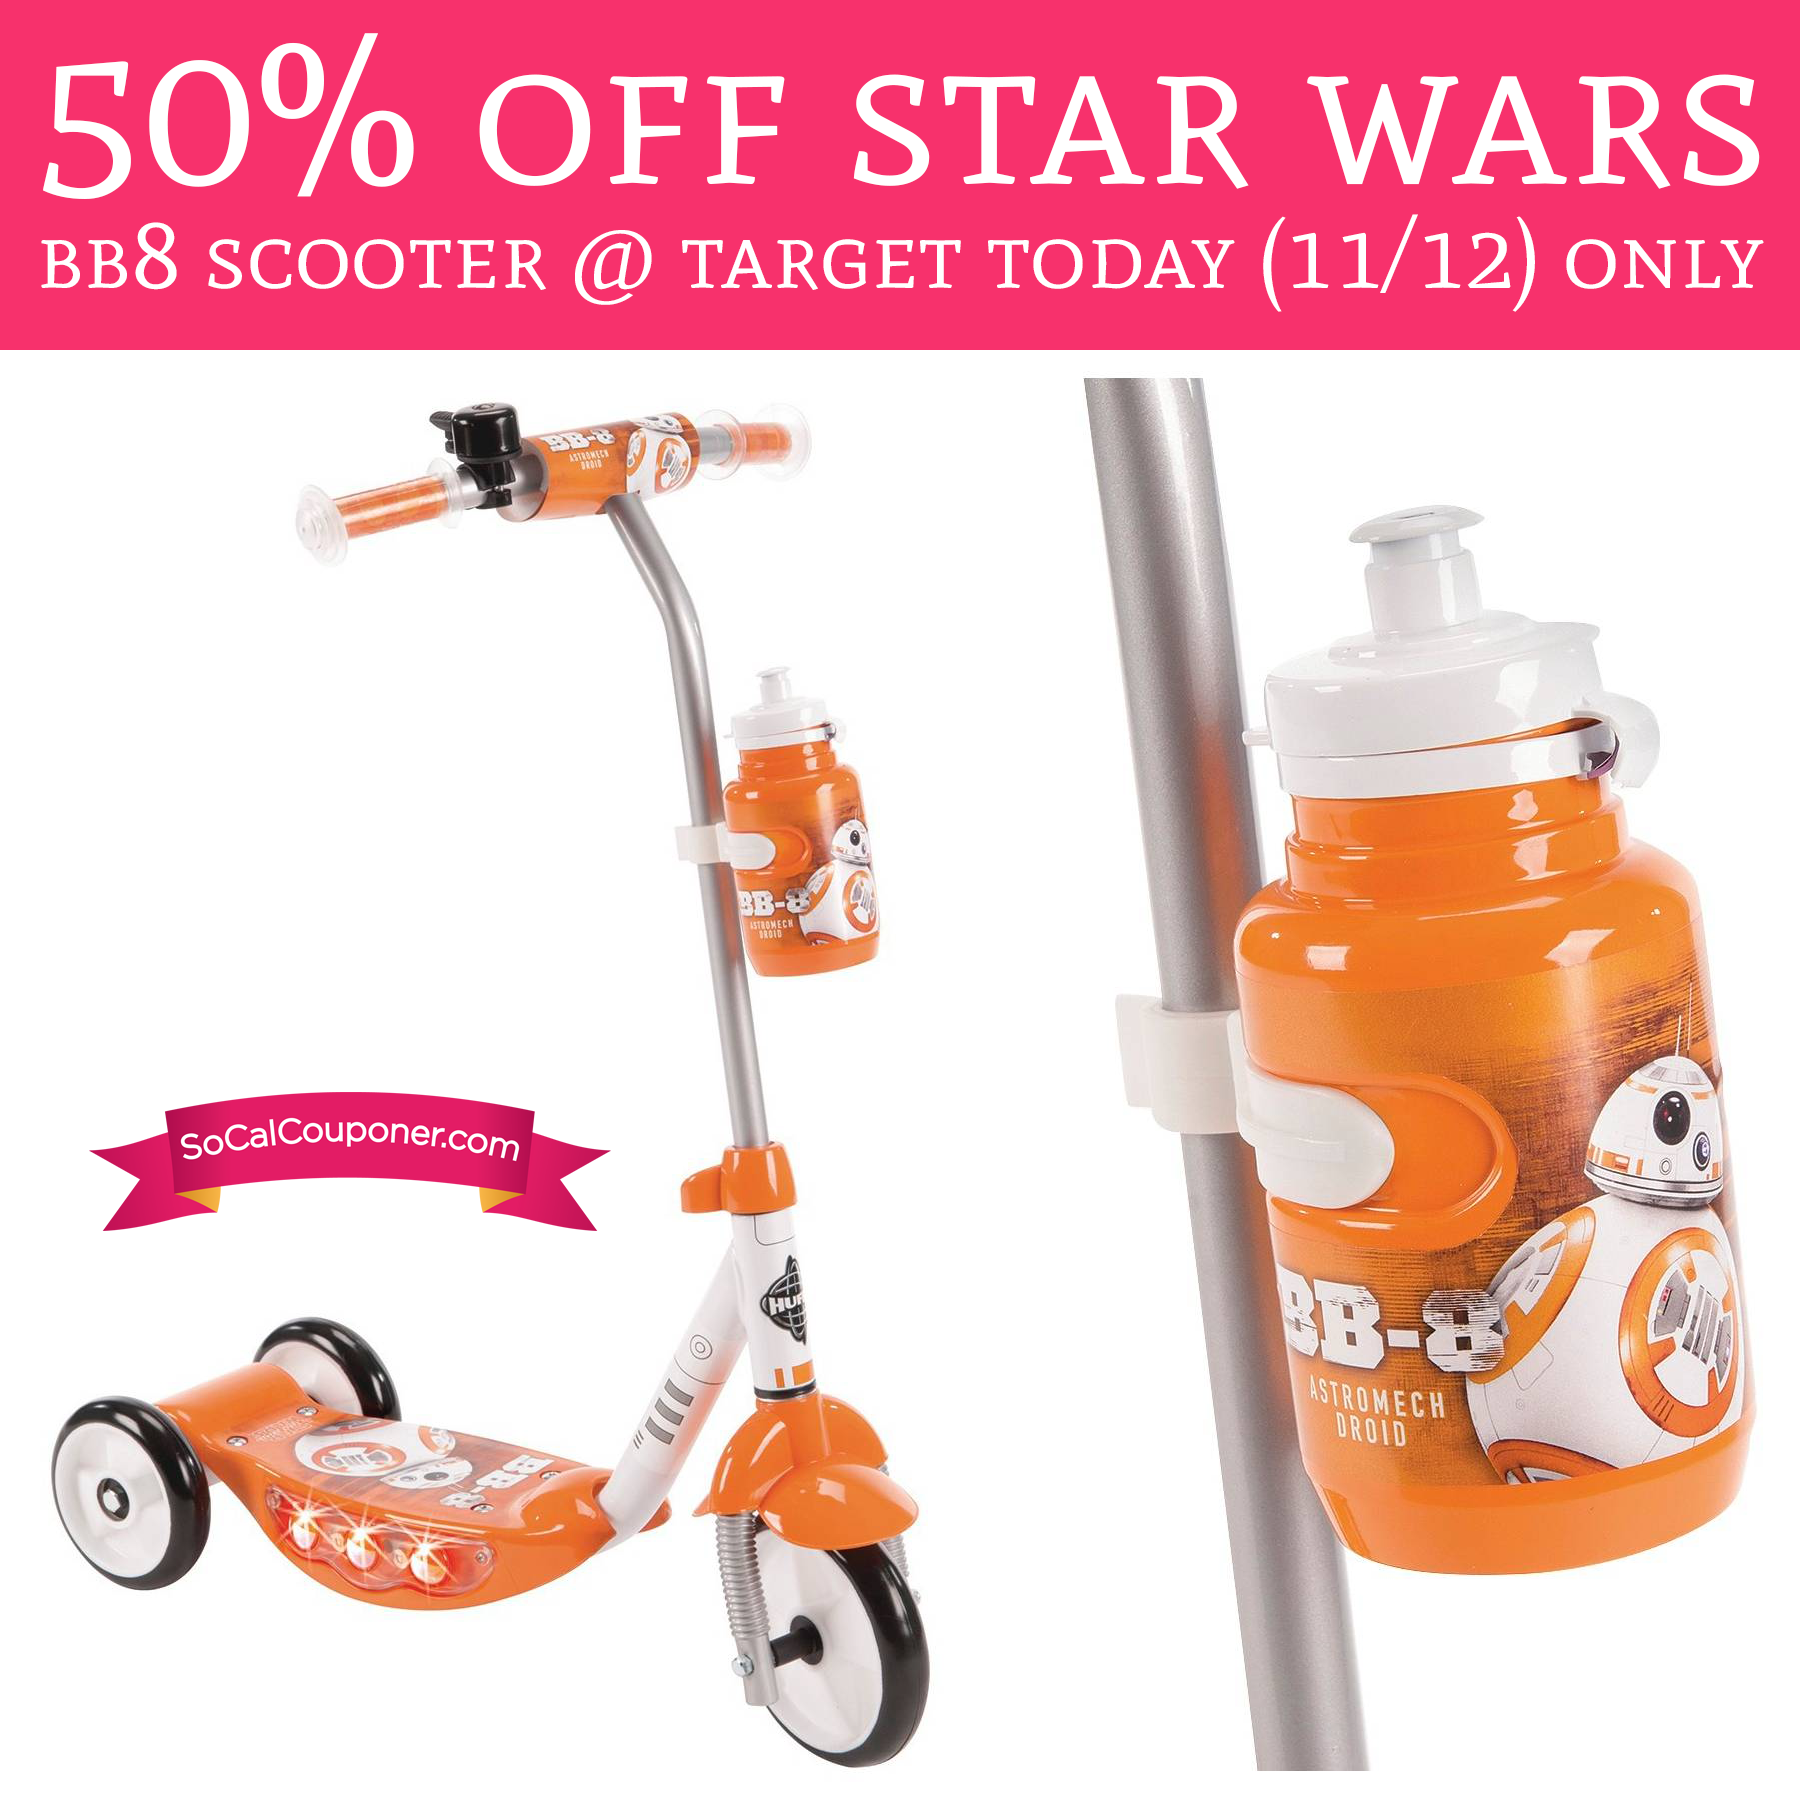 bb8-scooter